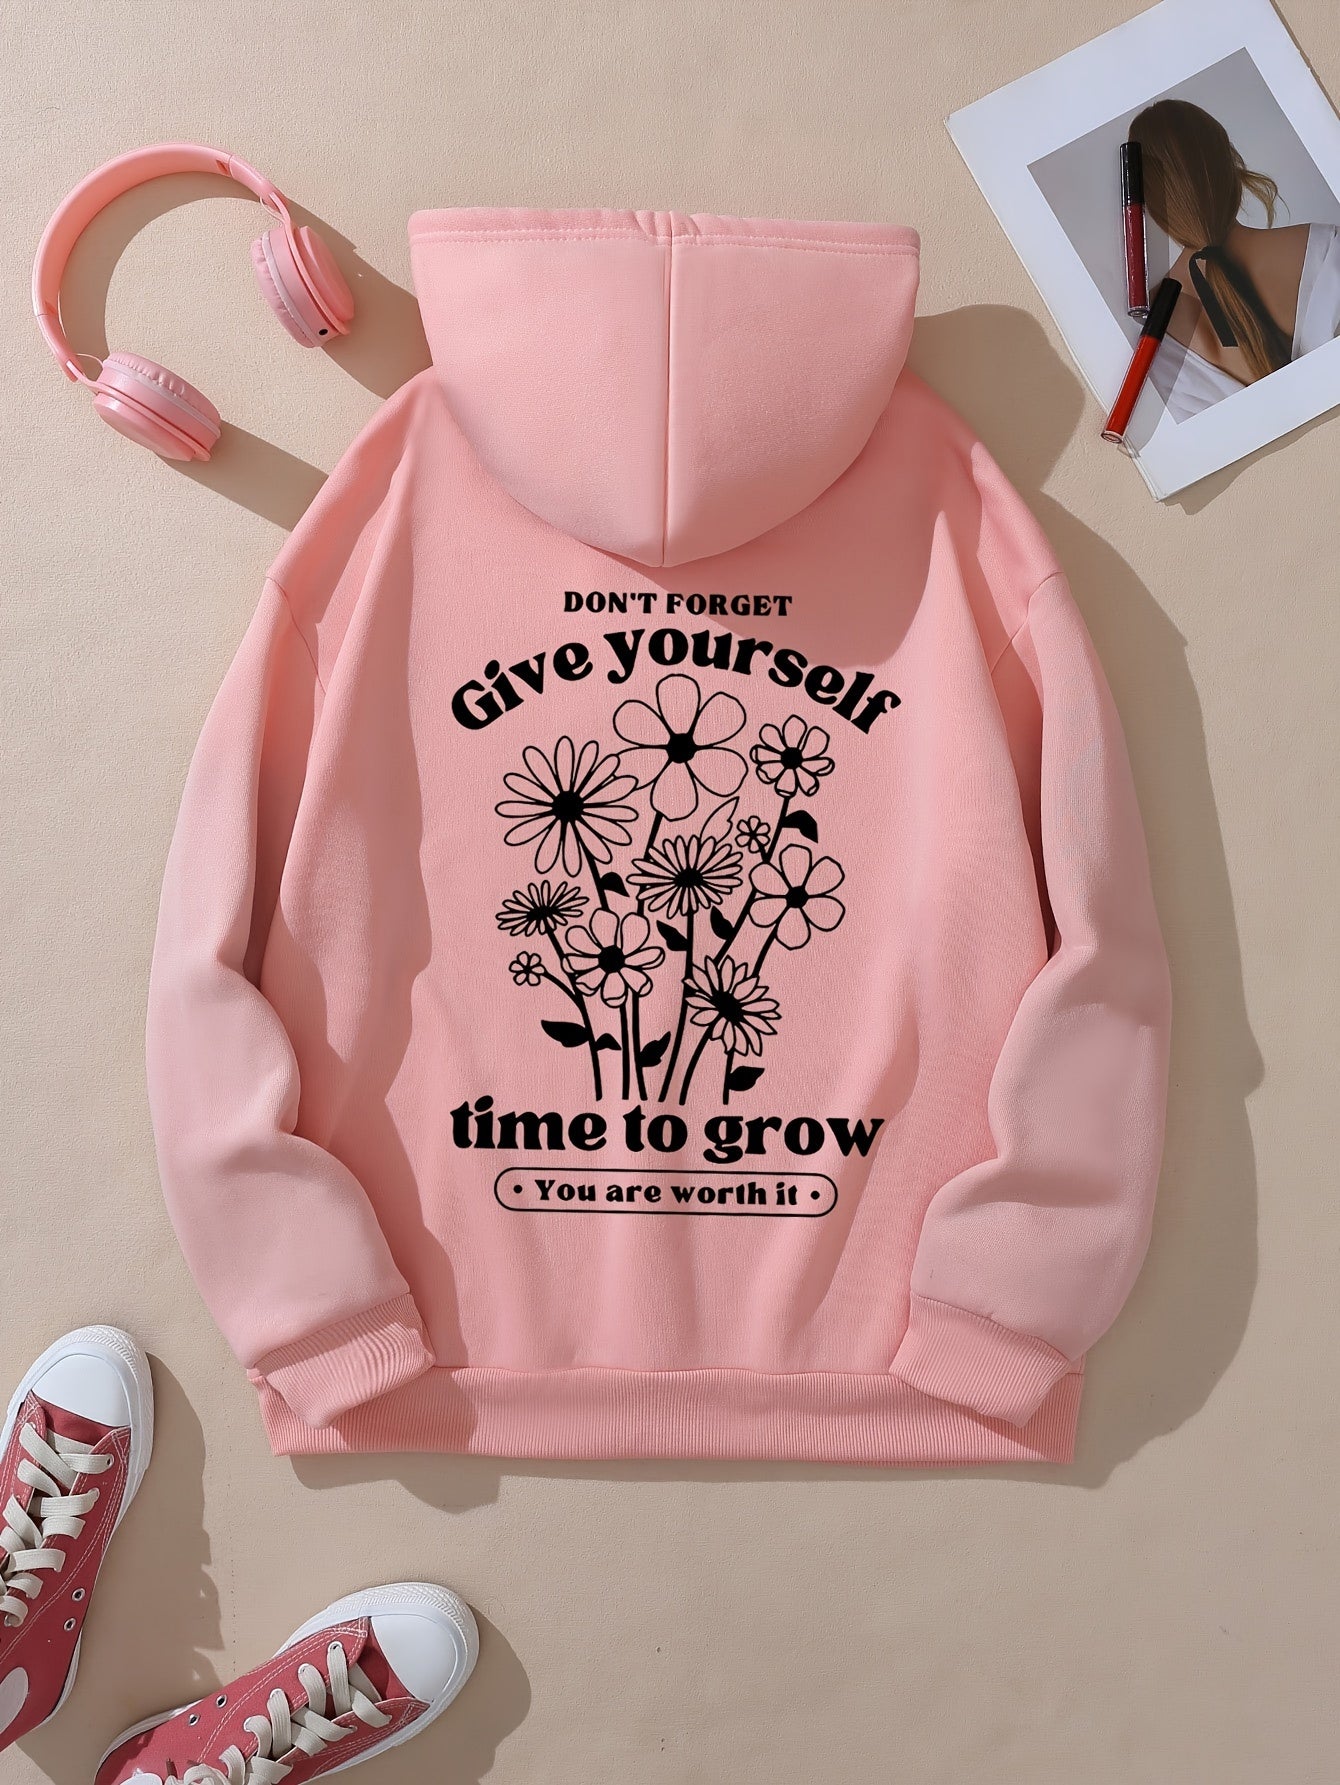 Give Yourself Time To Grow Women's Christian Pullover Hooded Sweatshirt claimedbygoddesigns